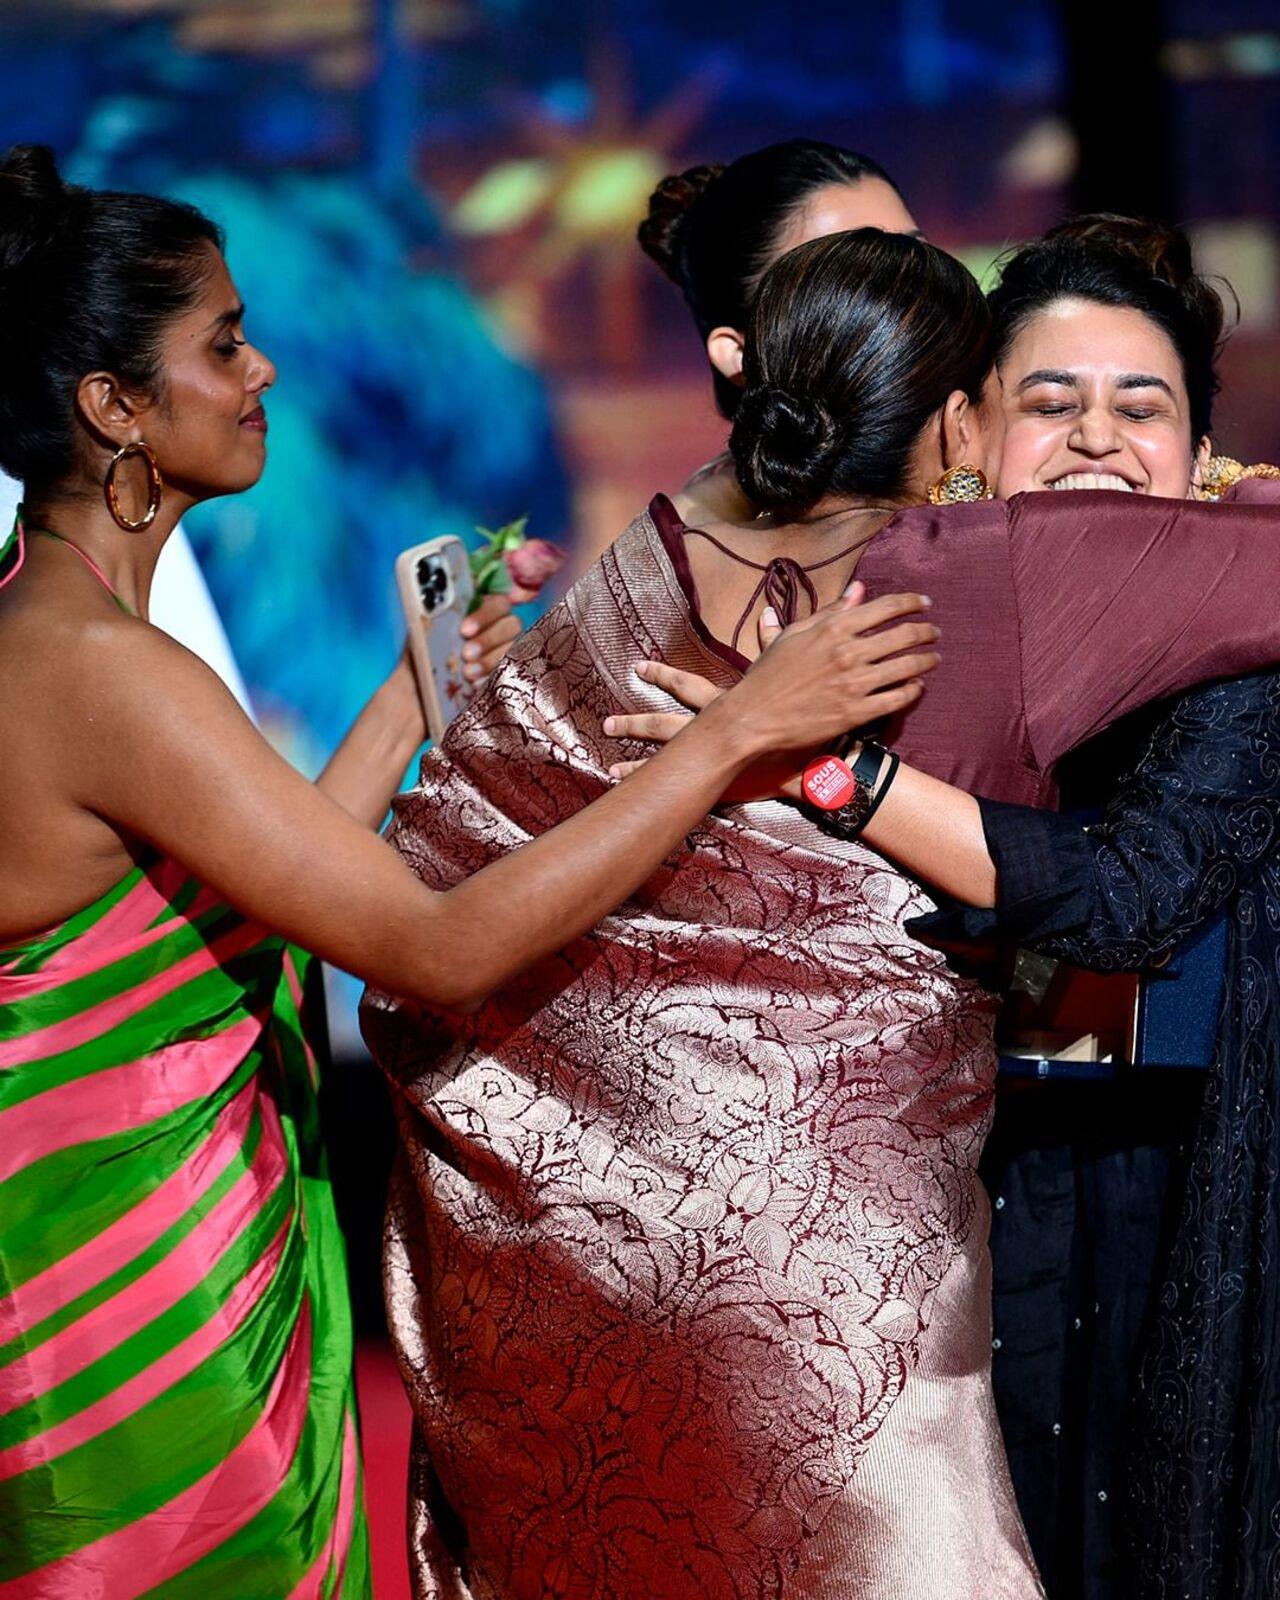 The women who had danced their way to the screening of their film on the red carpet on Thursday hugged and celebrated their moment on stage